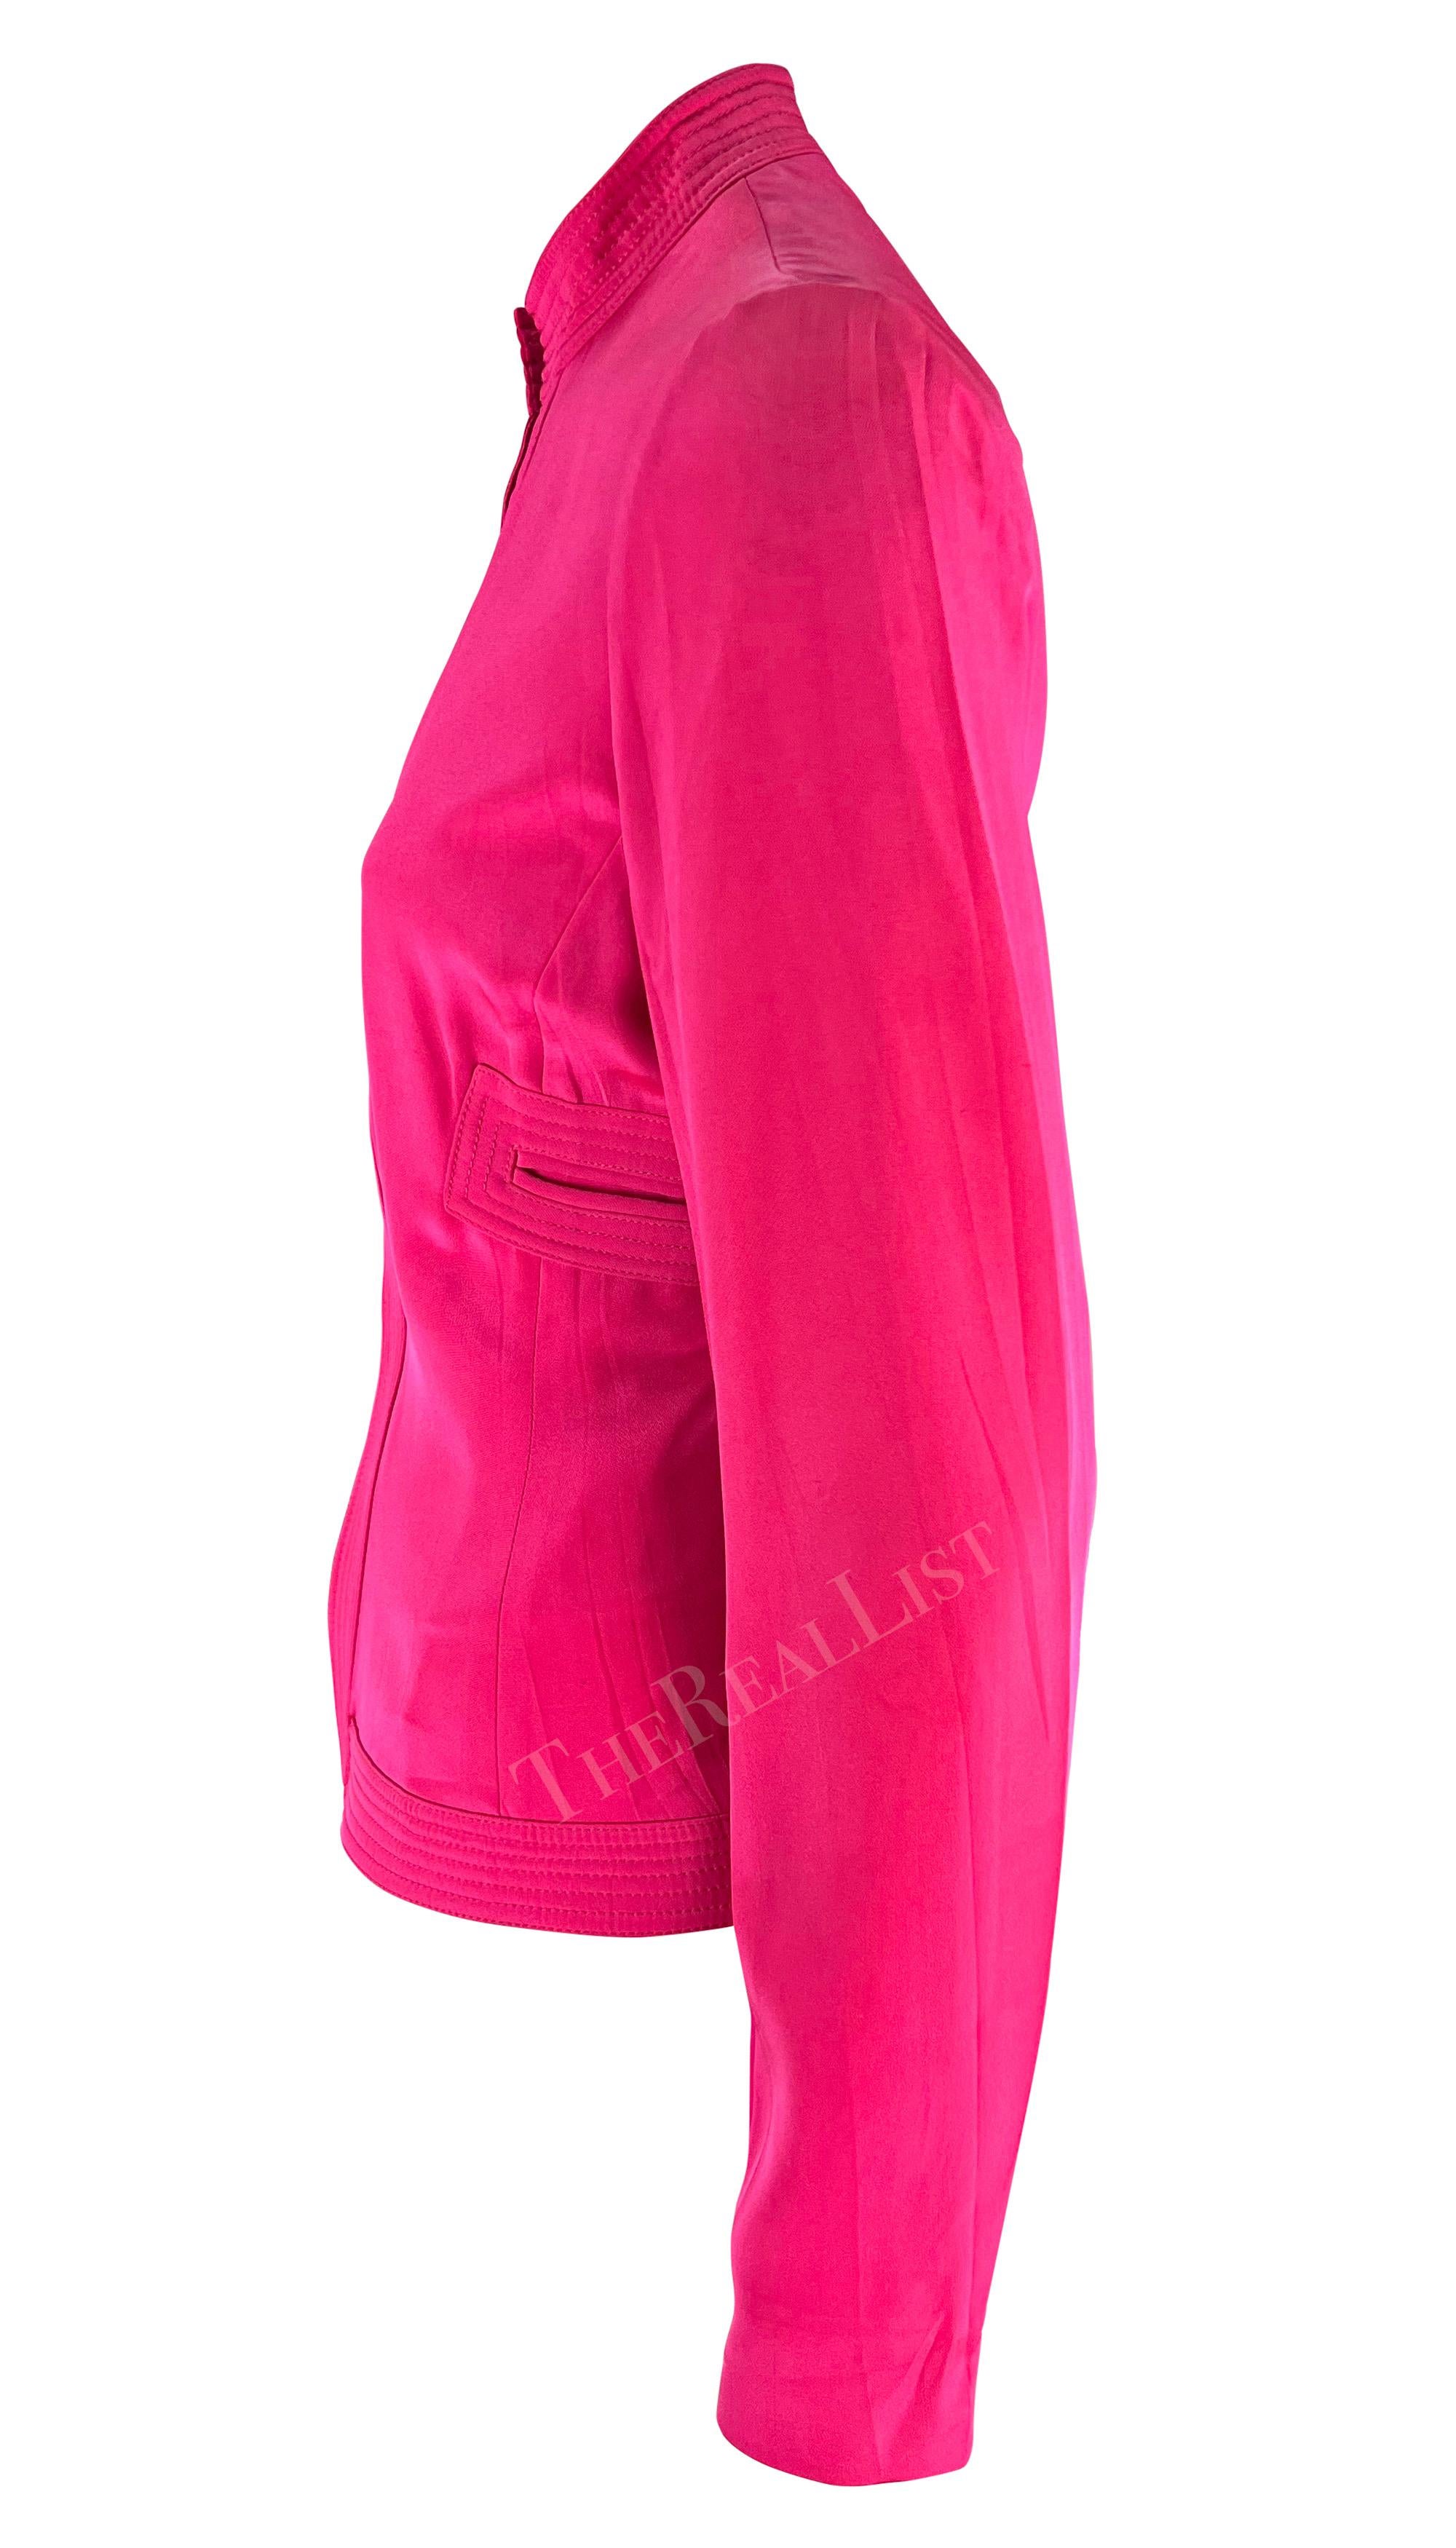 S/S 2003 Gianni Versace by Donatella Runway Hot Pink Long Sleeve Jacket  For Sale 1